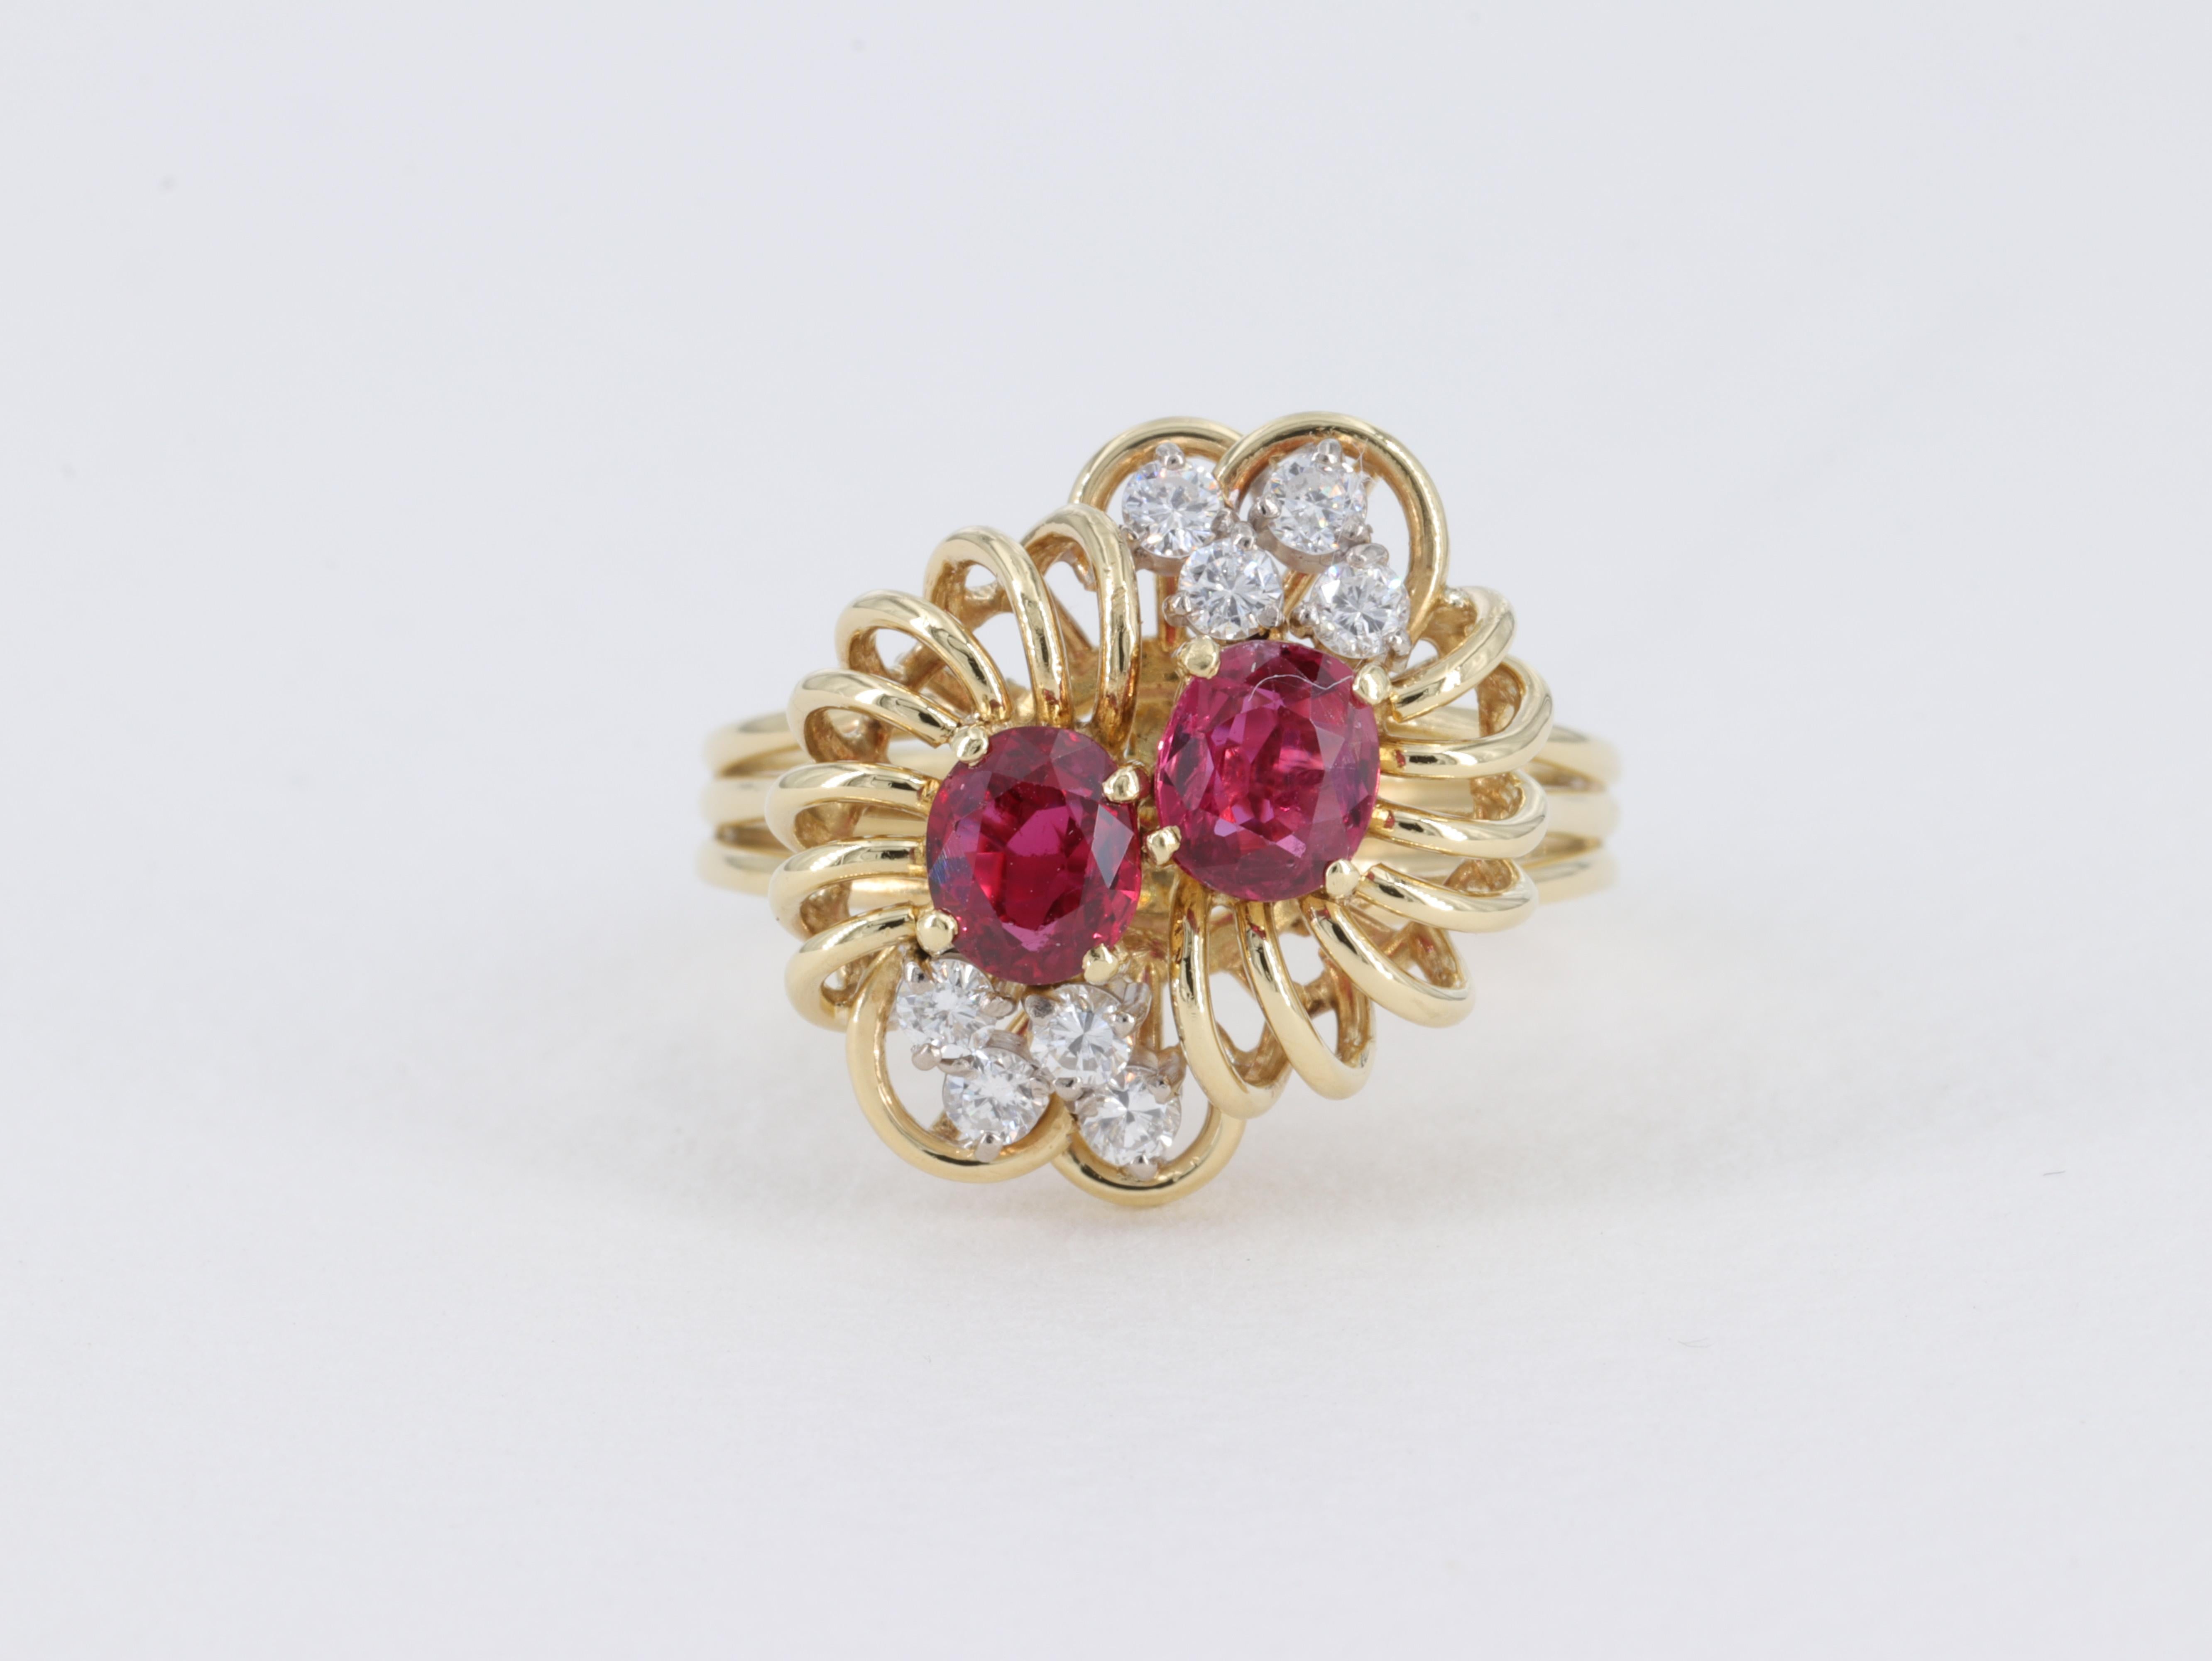 Retro Ruby and Diamond Ring Set with 2 Matching Oval Shape Rubies and 8 Round Brilliant Cut Diamonds Set in 18k Yellow Gold. 

Stones:

Rubies - 2 Stones = 0.82 carats
Color - Vivid Red 
Clarity - Eye Clean 
        
Diamonds - 8 Stones = 0.28